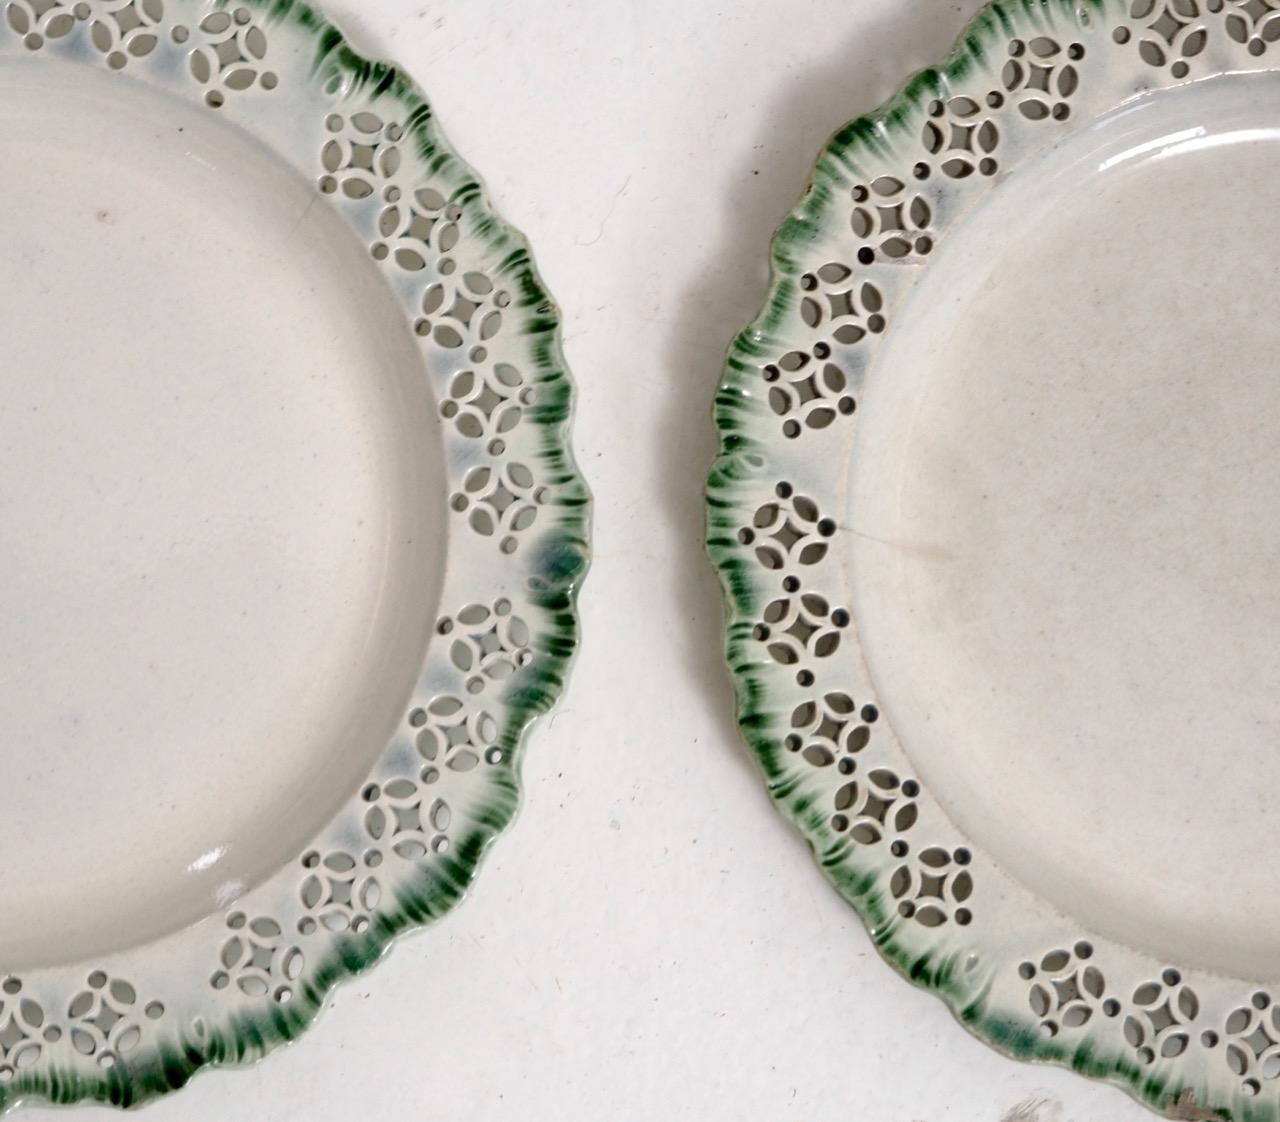 European Pair of English Creamware Plates, 18th Century, from Important Danish Collection For Sale